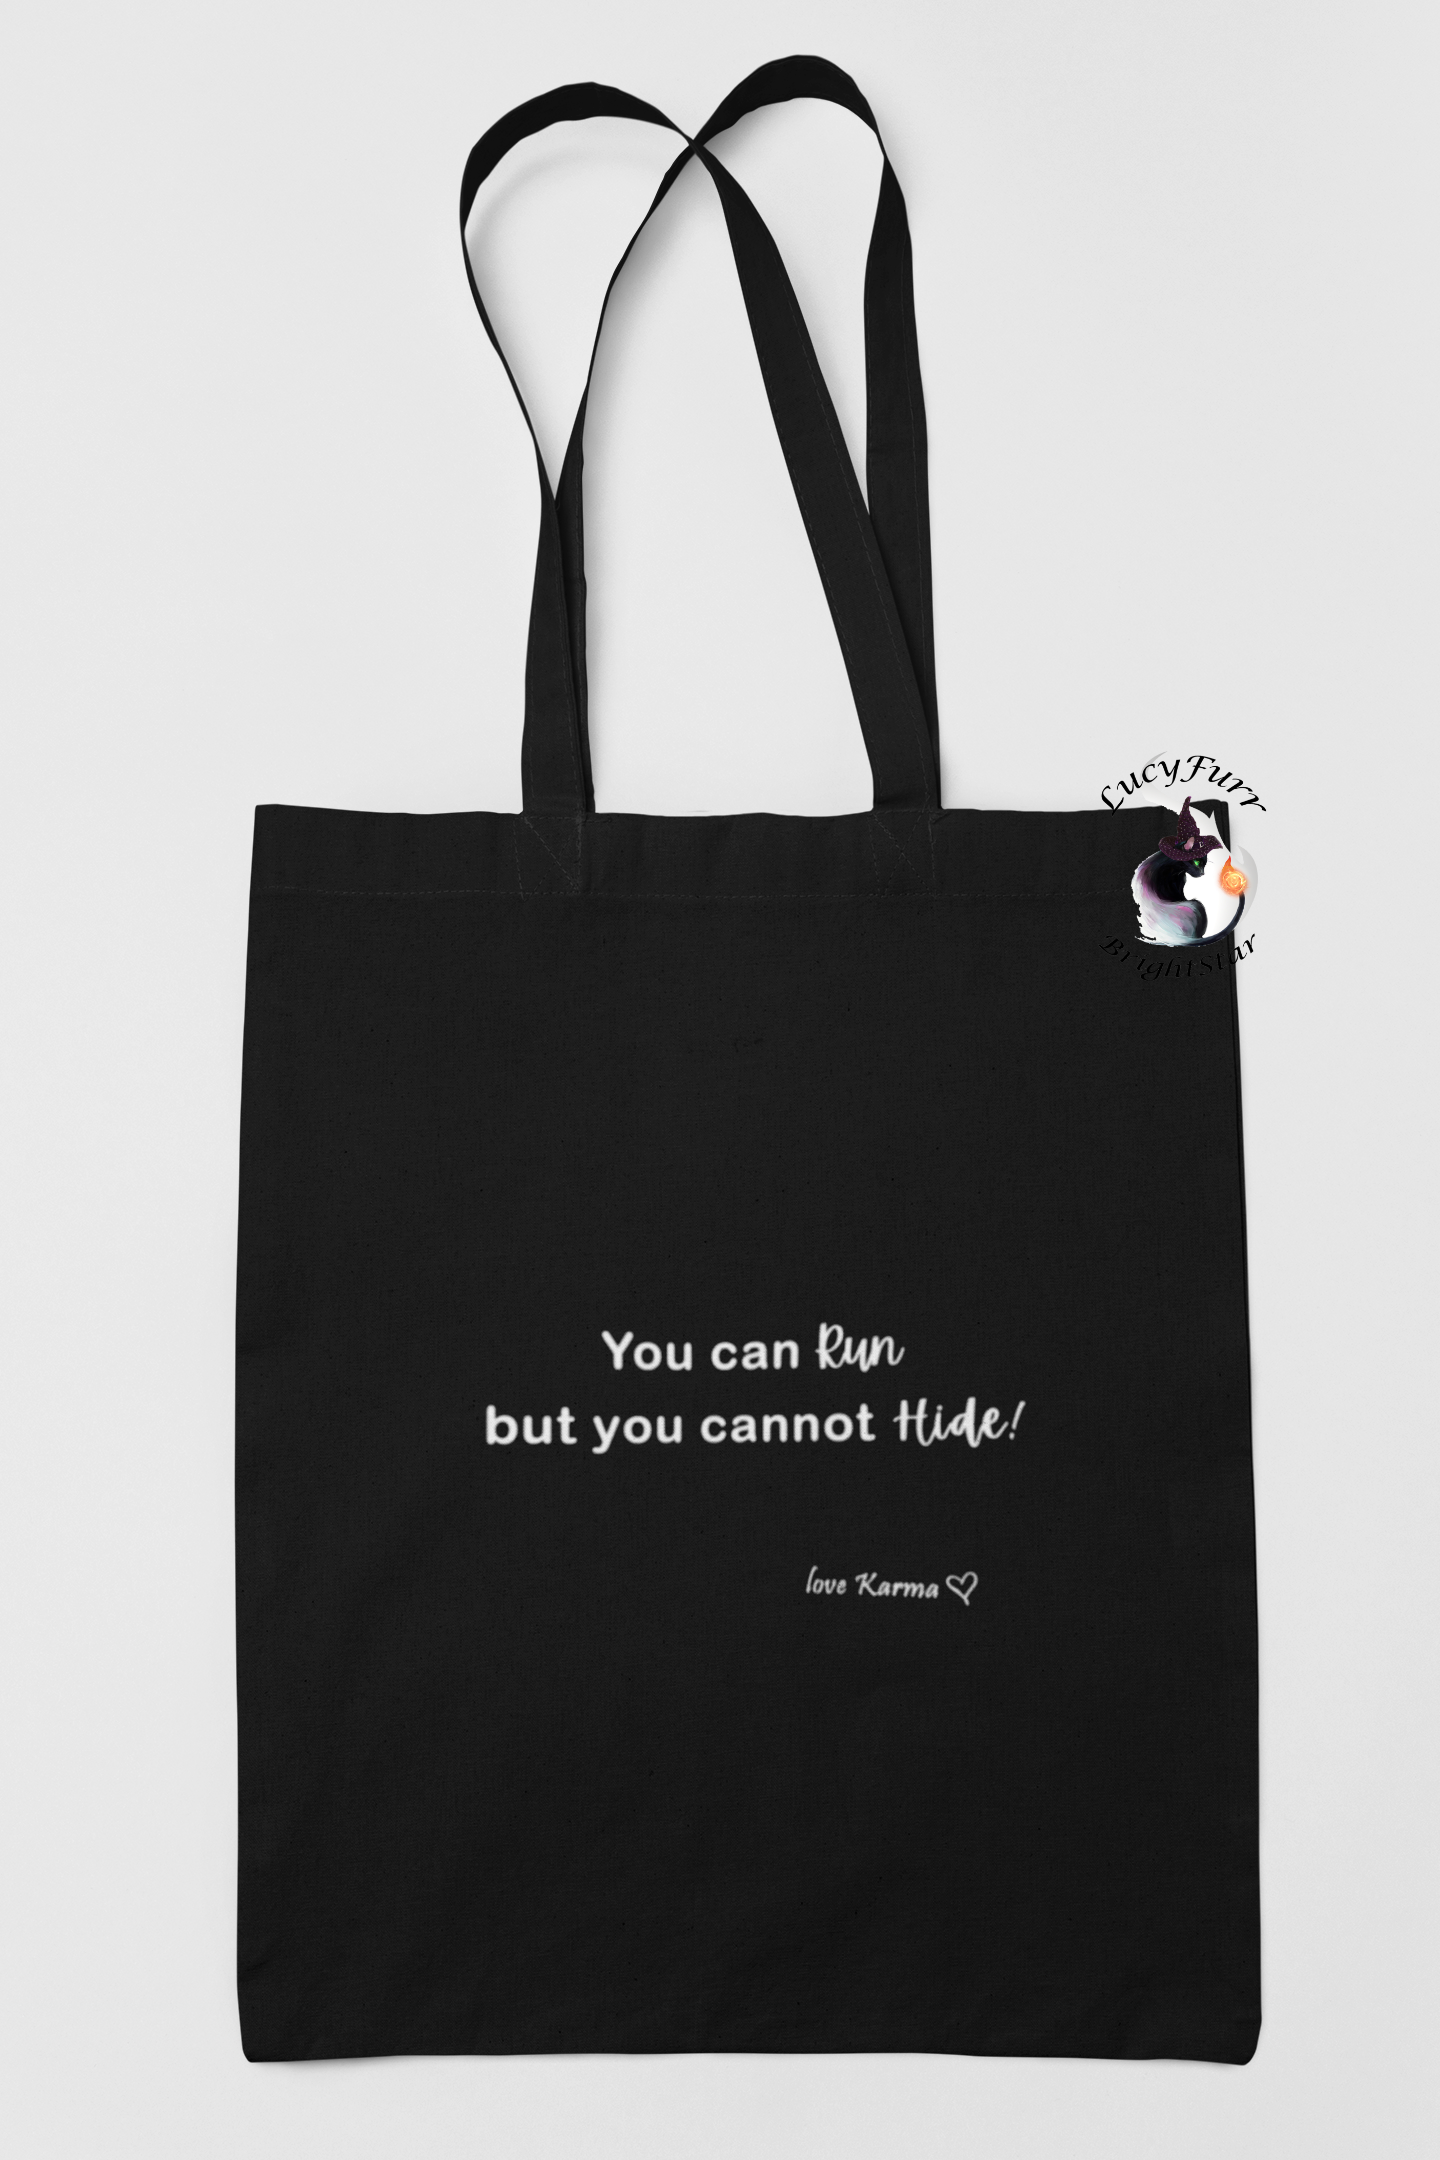 You Can Run But Cannot Hide Karma  Tote Bag